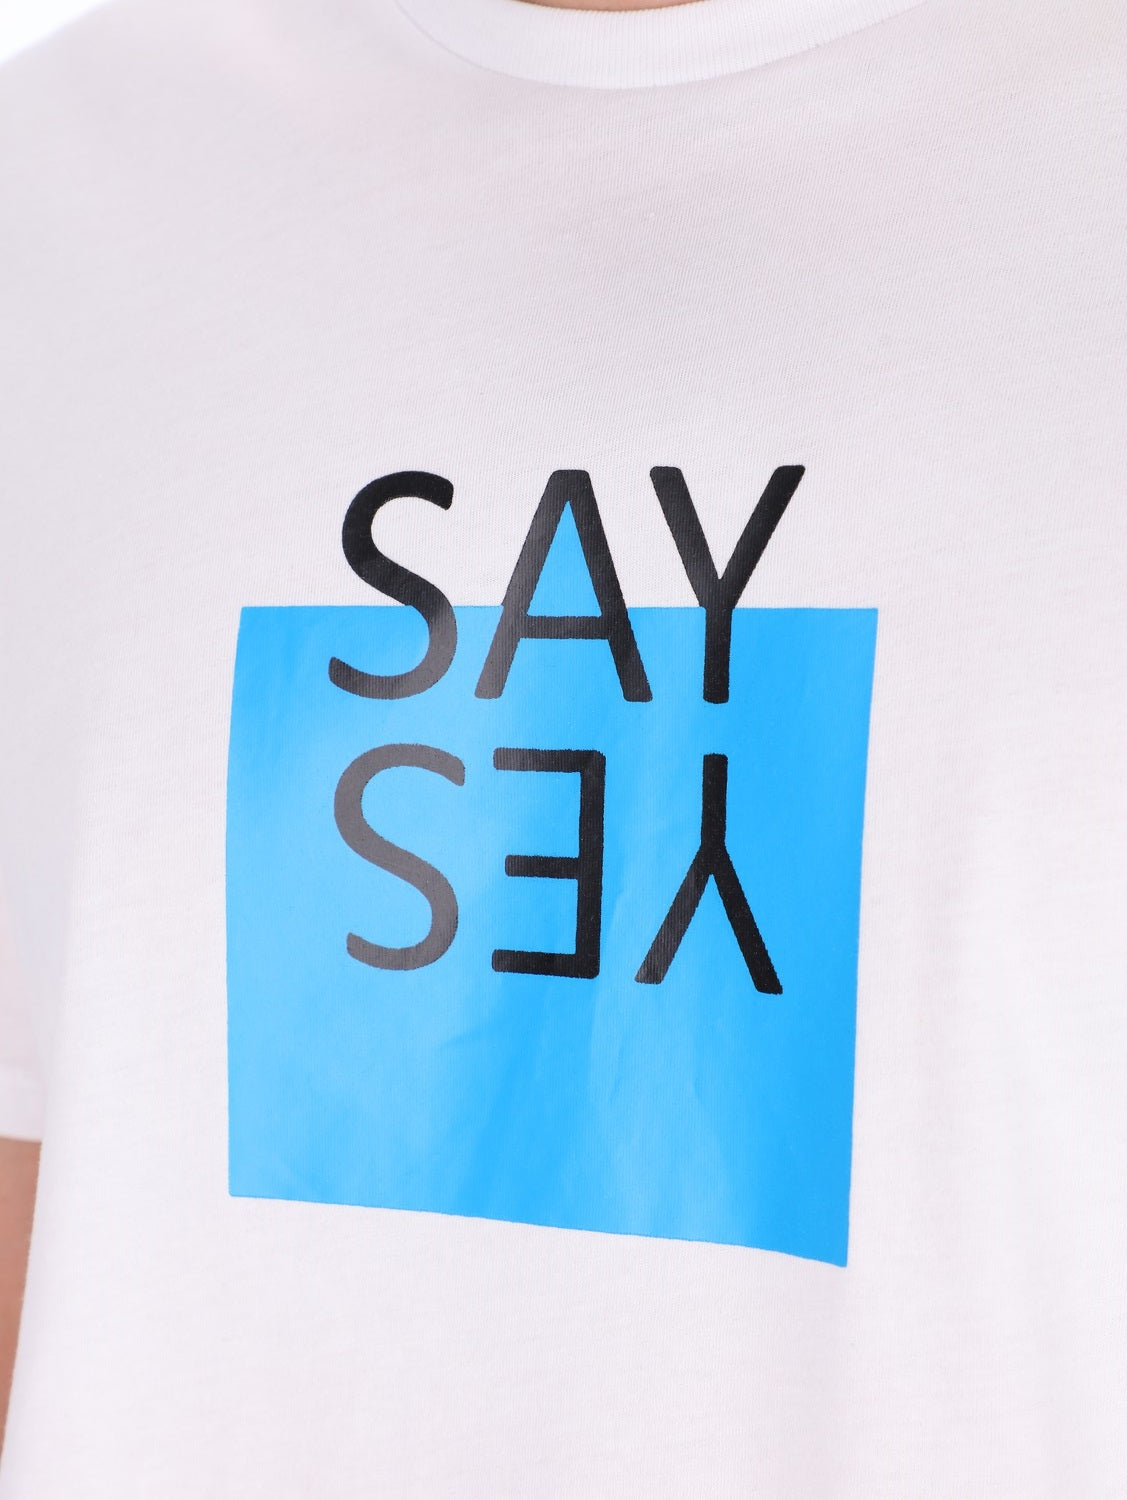 OR Men's Say Yes Print Crew Neck T-Shirt